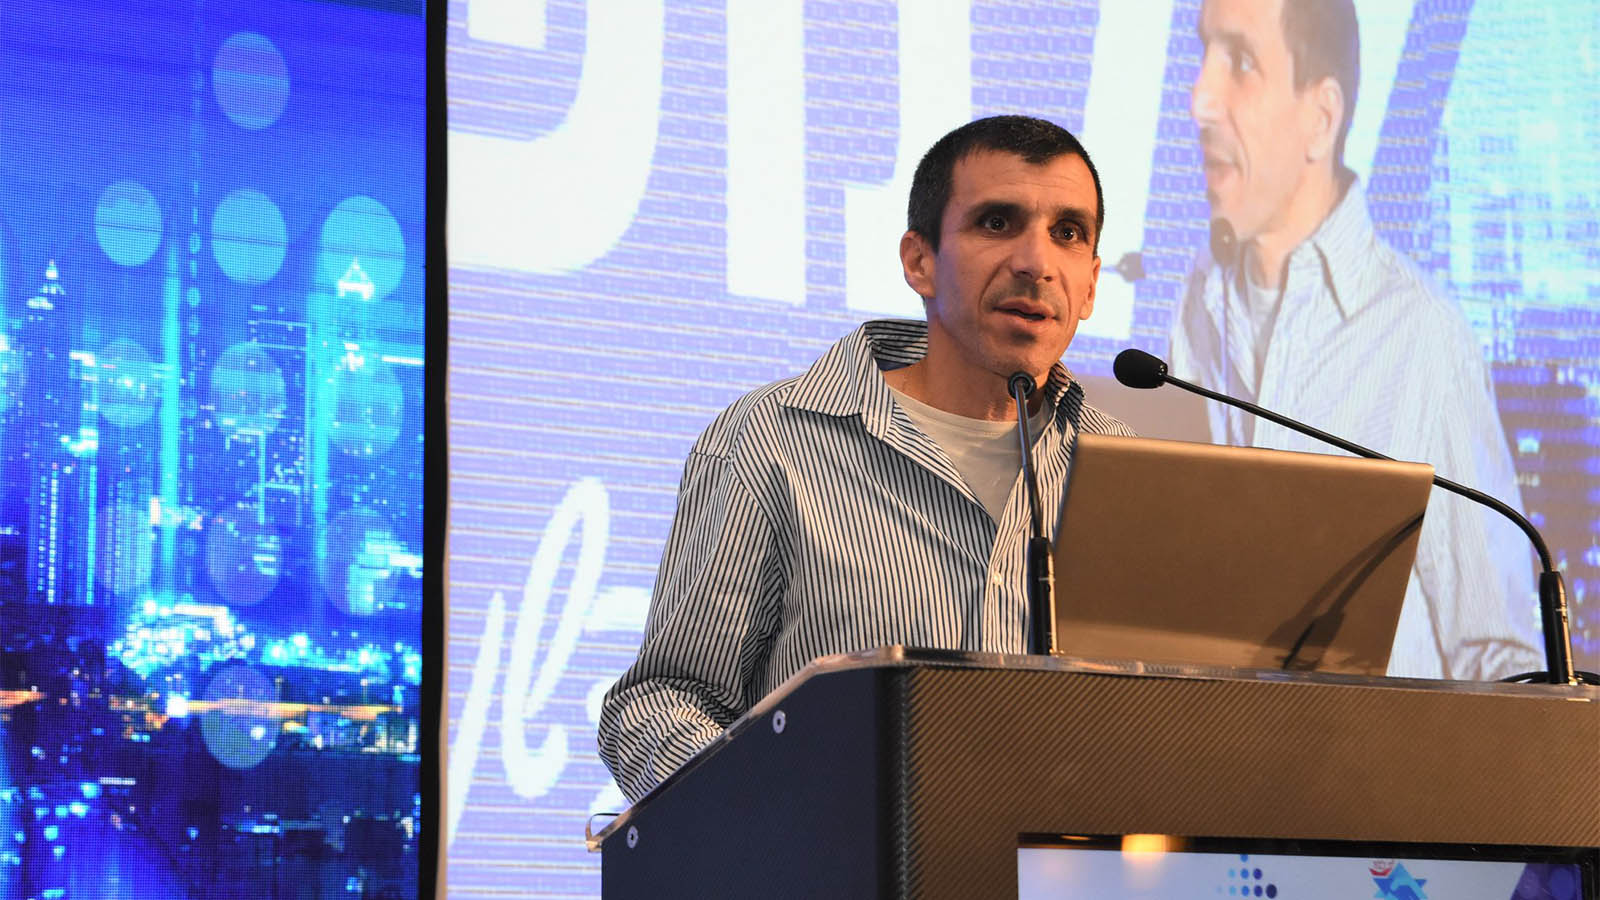 Amichai Satinger at the Eilat Labor Conference, February 12, 2020. “The new unions come from the factories, the supermarkets, the insurance companies, the high-tech companies, the contractor companies, and the youth movements.” (Photo: Histadrut)